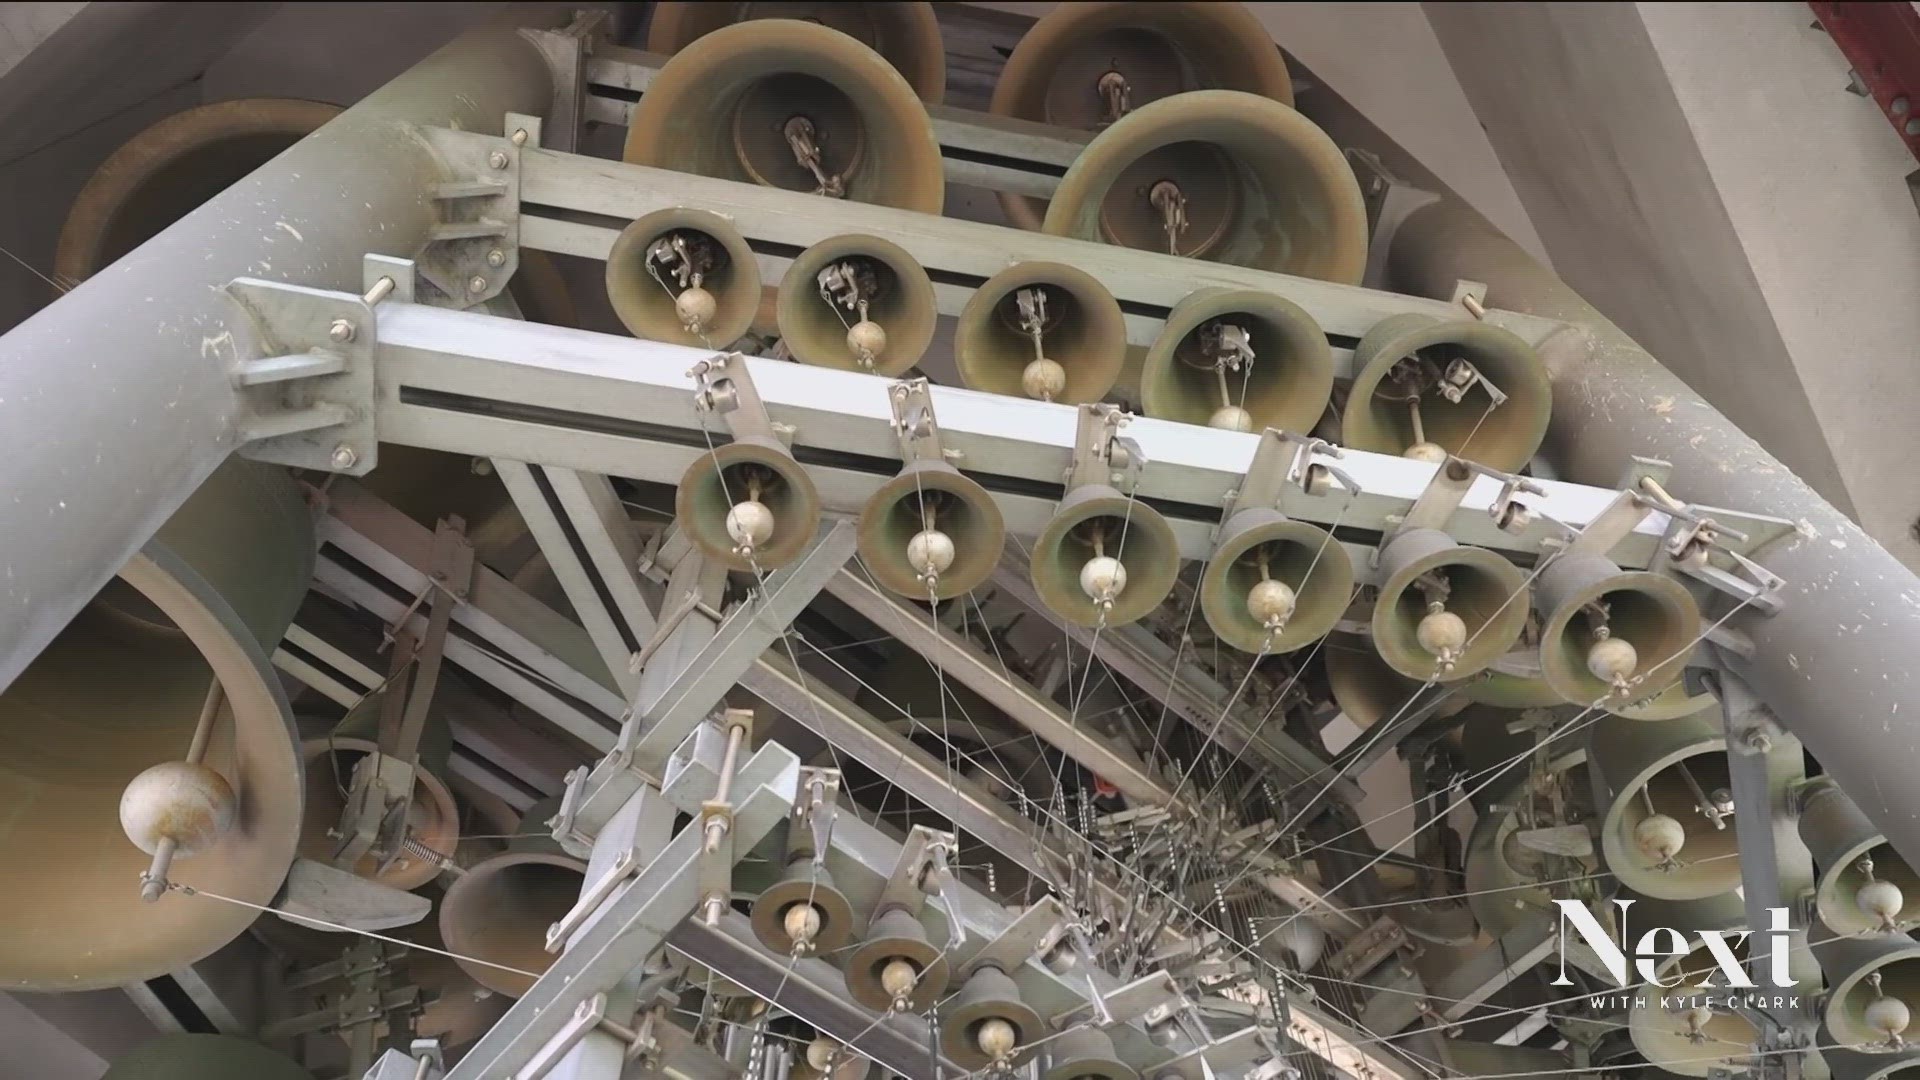 The carillon inside DU's gold bell tower is one of only a few hundred instruments like it - with a very select few who know know how to make it ring.